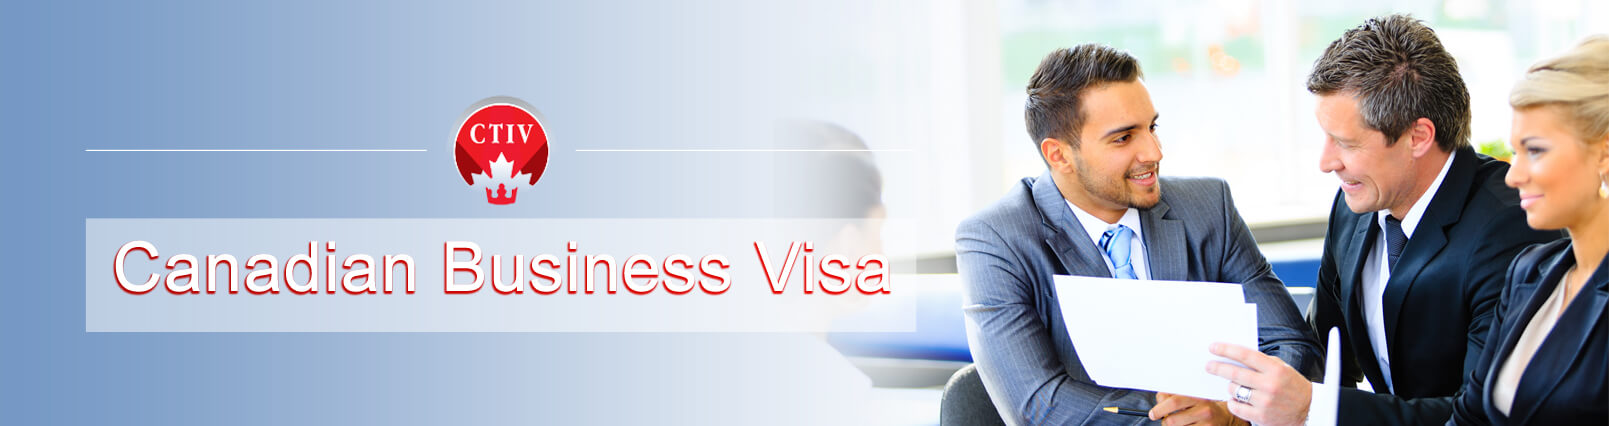 Canadian Business Visa Primary